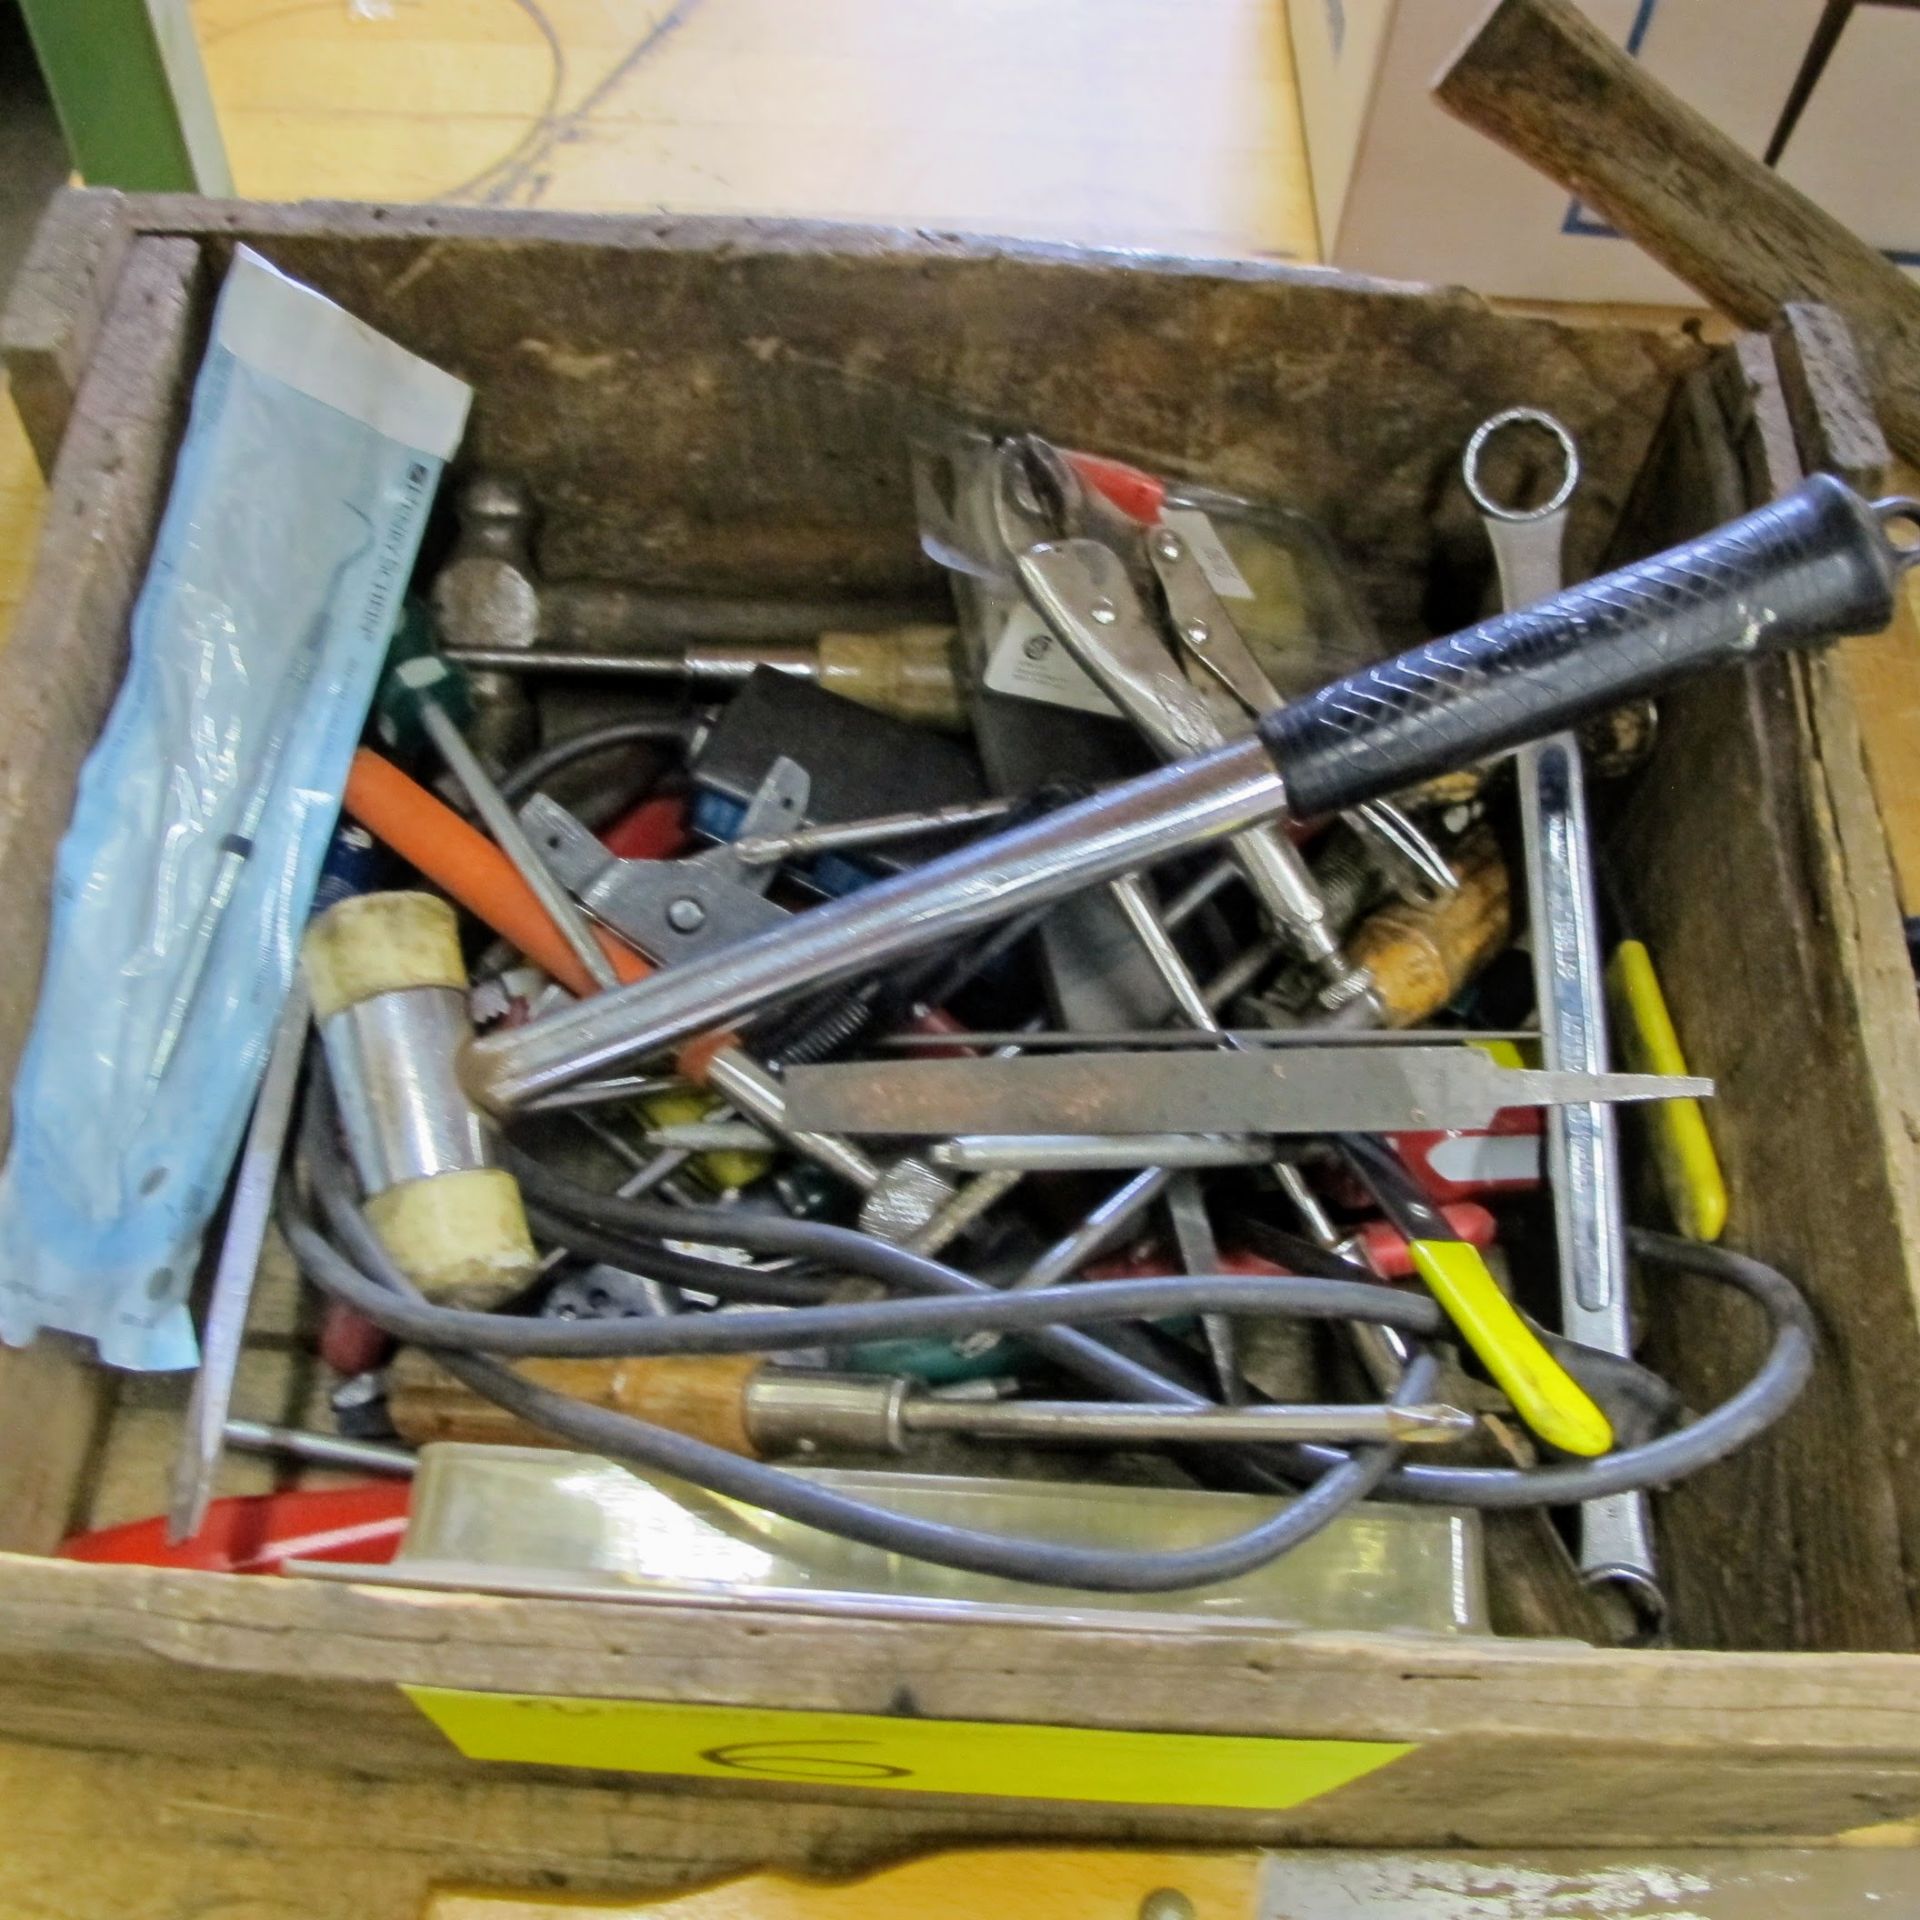 LOT OF 3 WOOD CRATES W/HAND TOOLS, PIPE CUTTERS, SAWS, PIPE WRENCH, HAMMERS, FILES, DRIVERS, ETC - Image 2 of 4